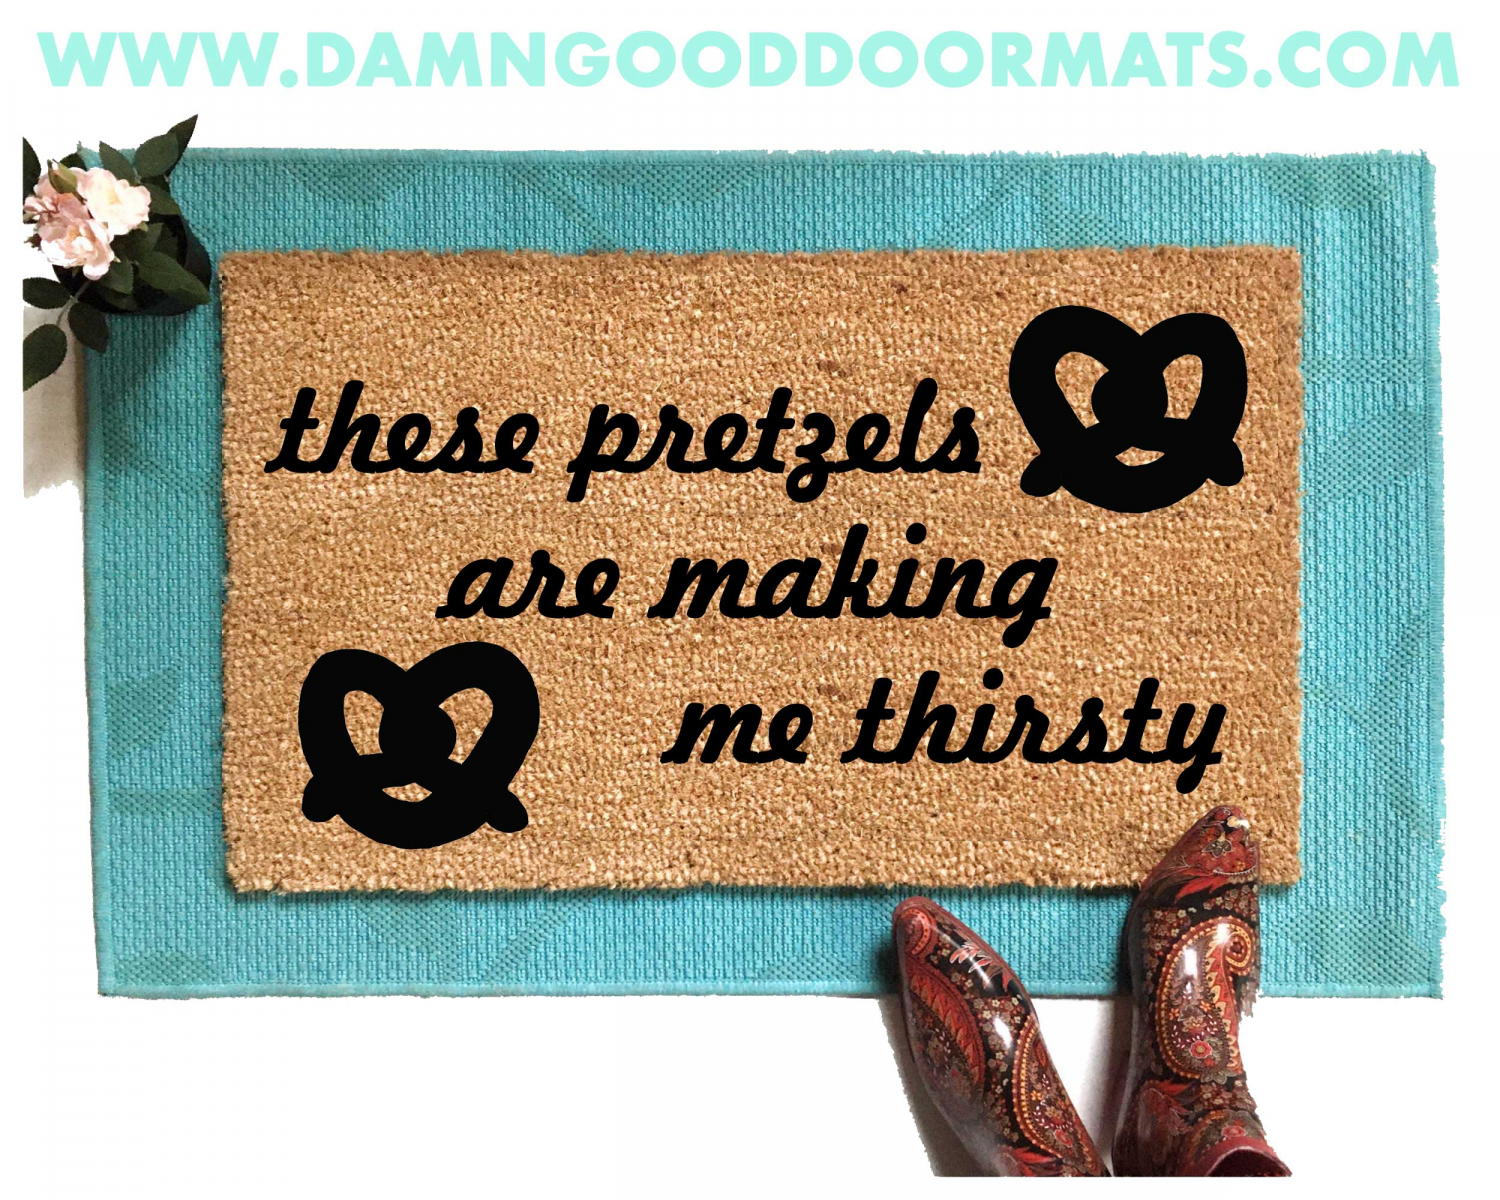 seinfeld pretzels are making me thirsty funny damn good doormat housewarming gift